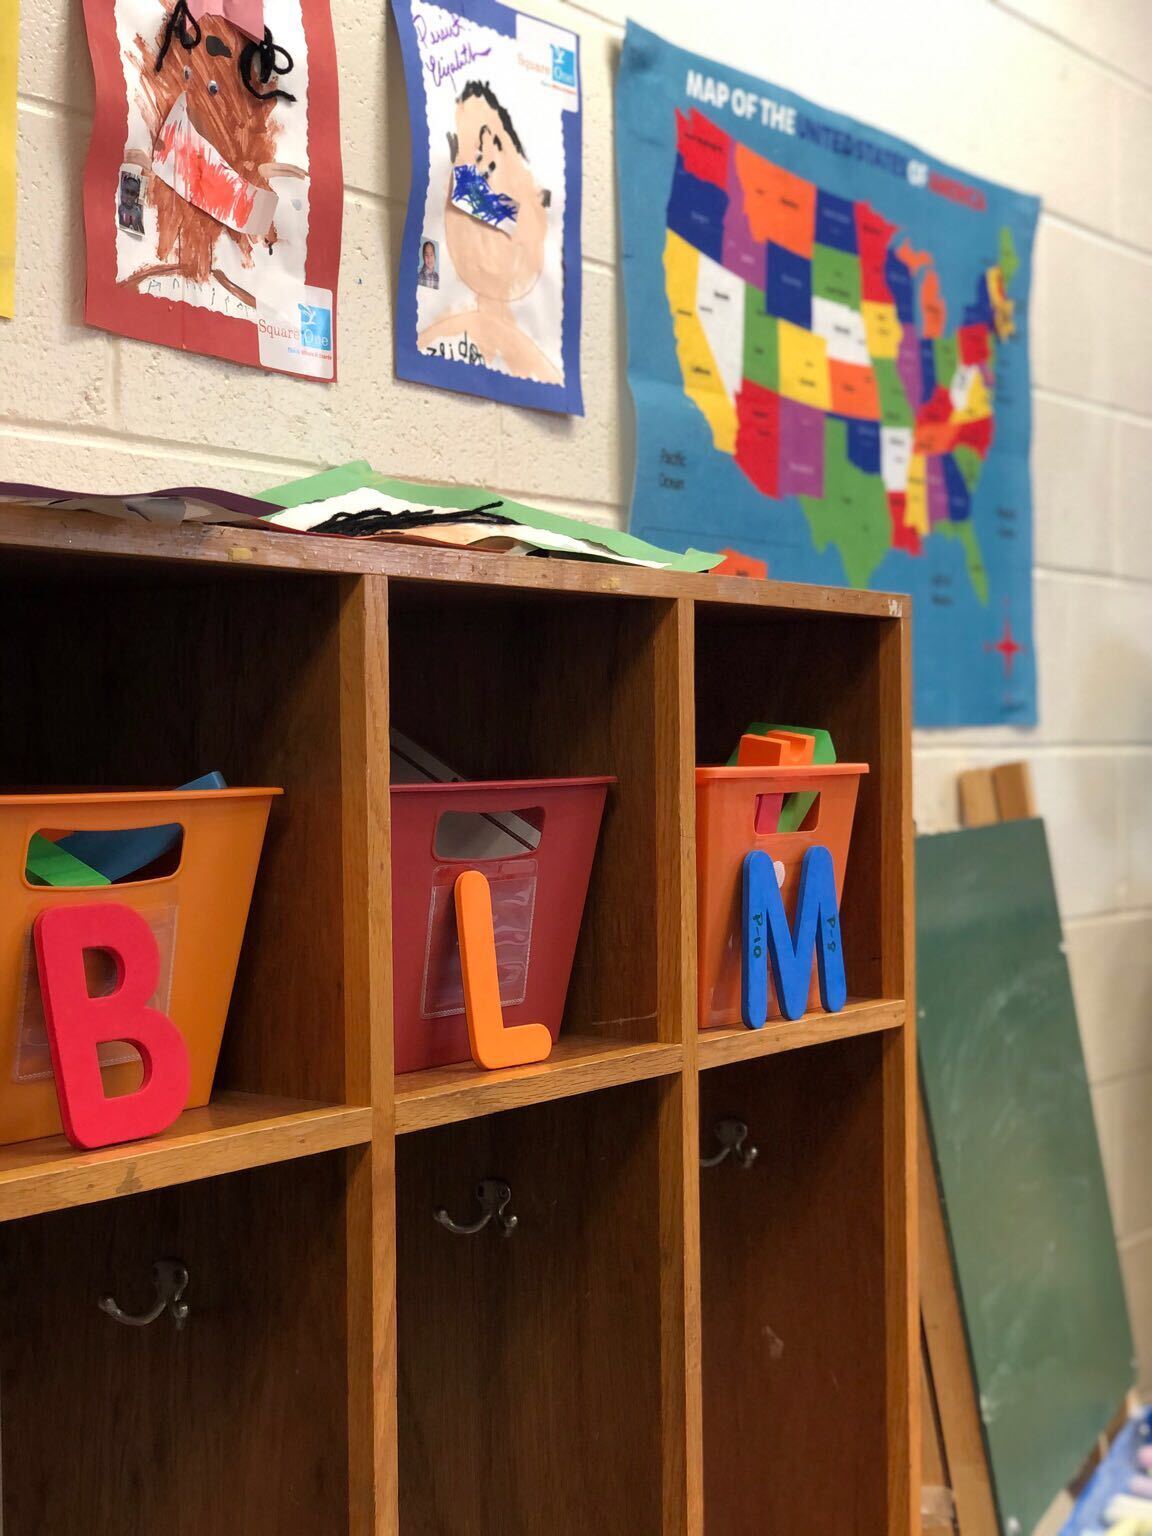 BLM letters hidden in the classroom.